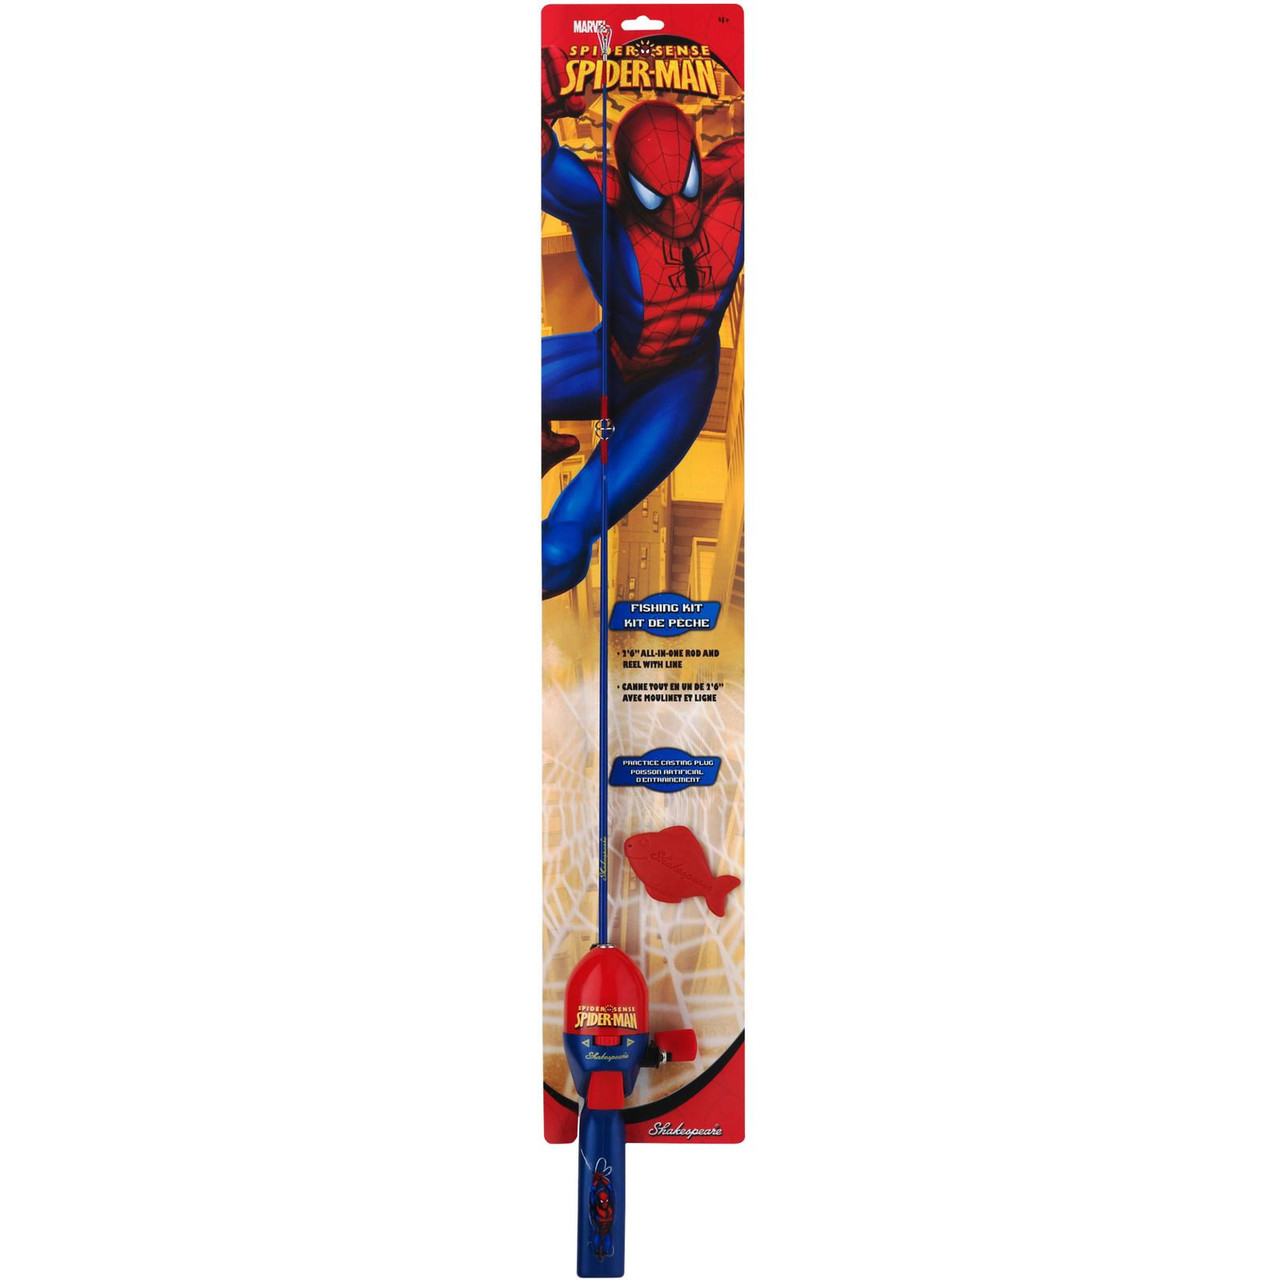 Shakespeare Spider-Man Fishing Kit with 2'6 All-In-One Casting